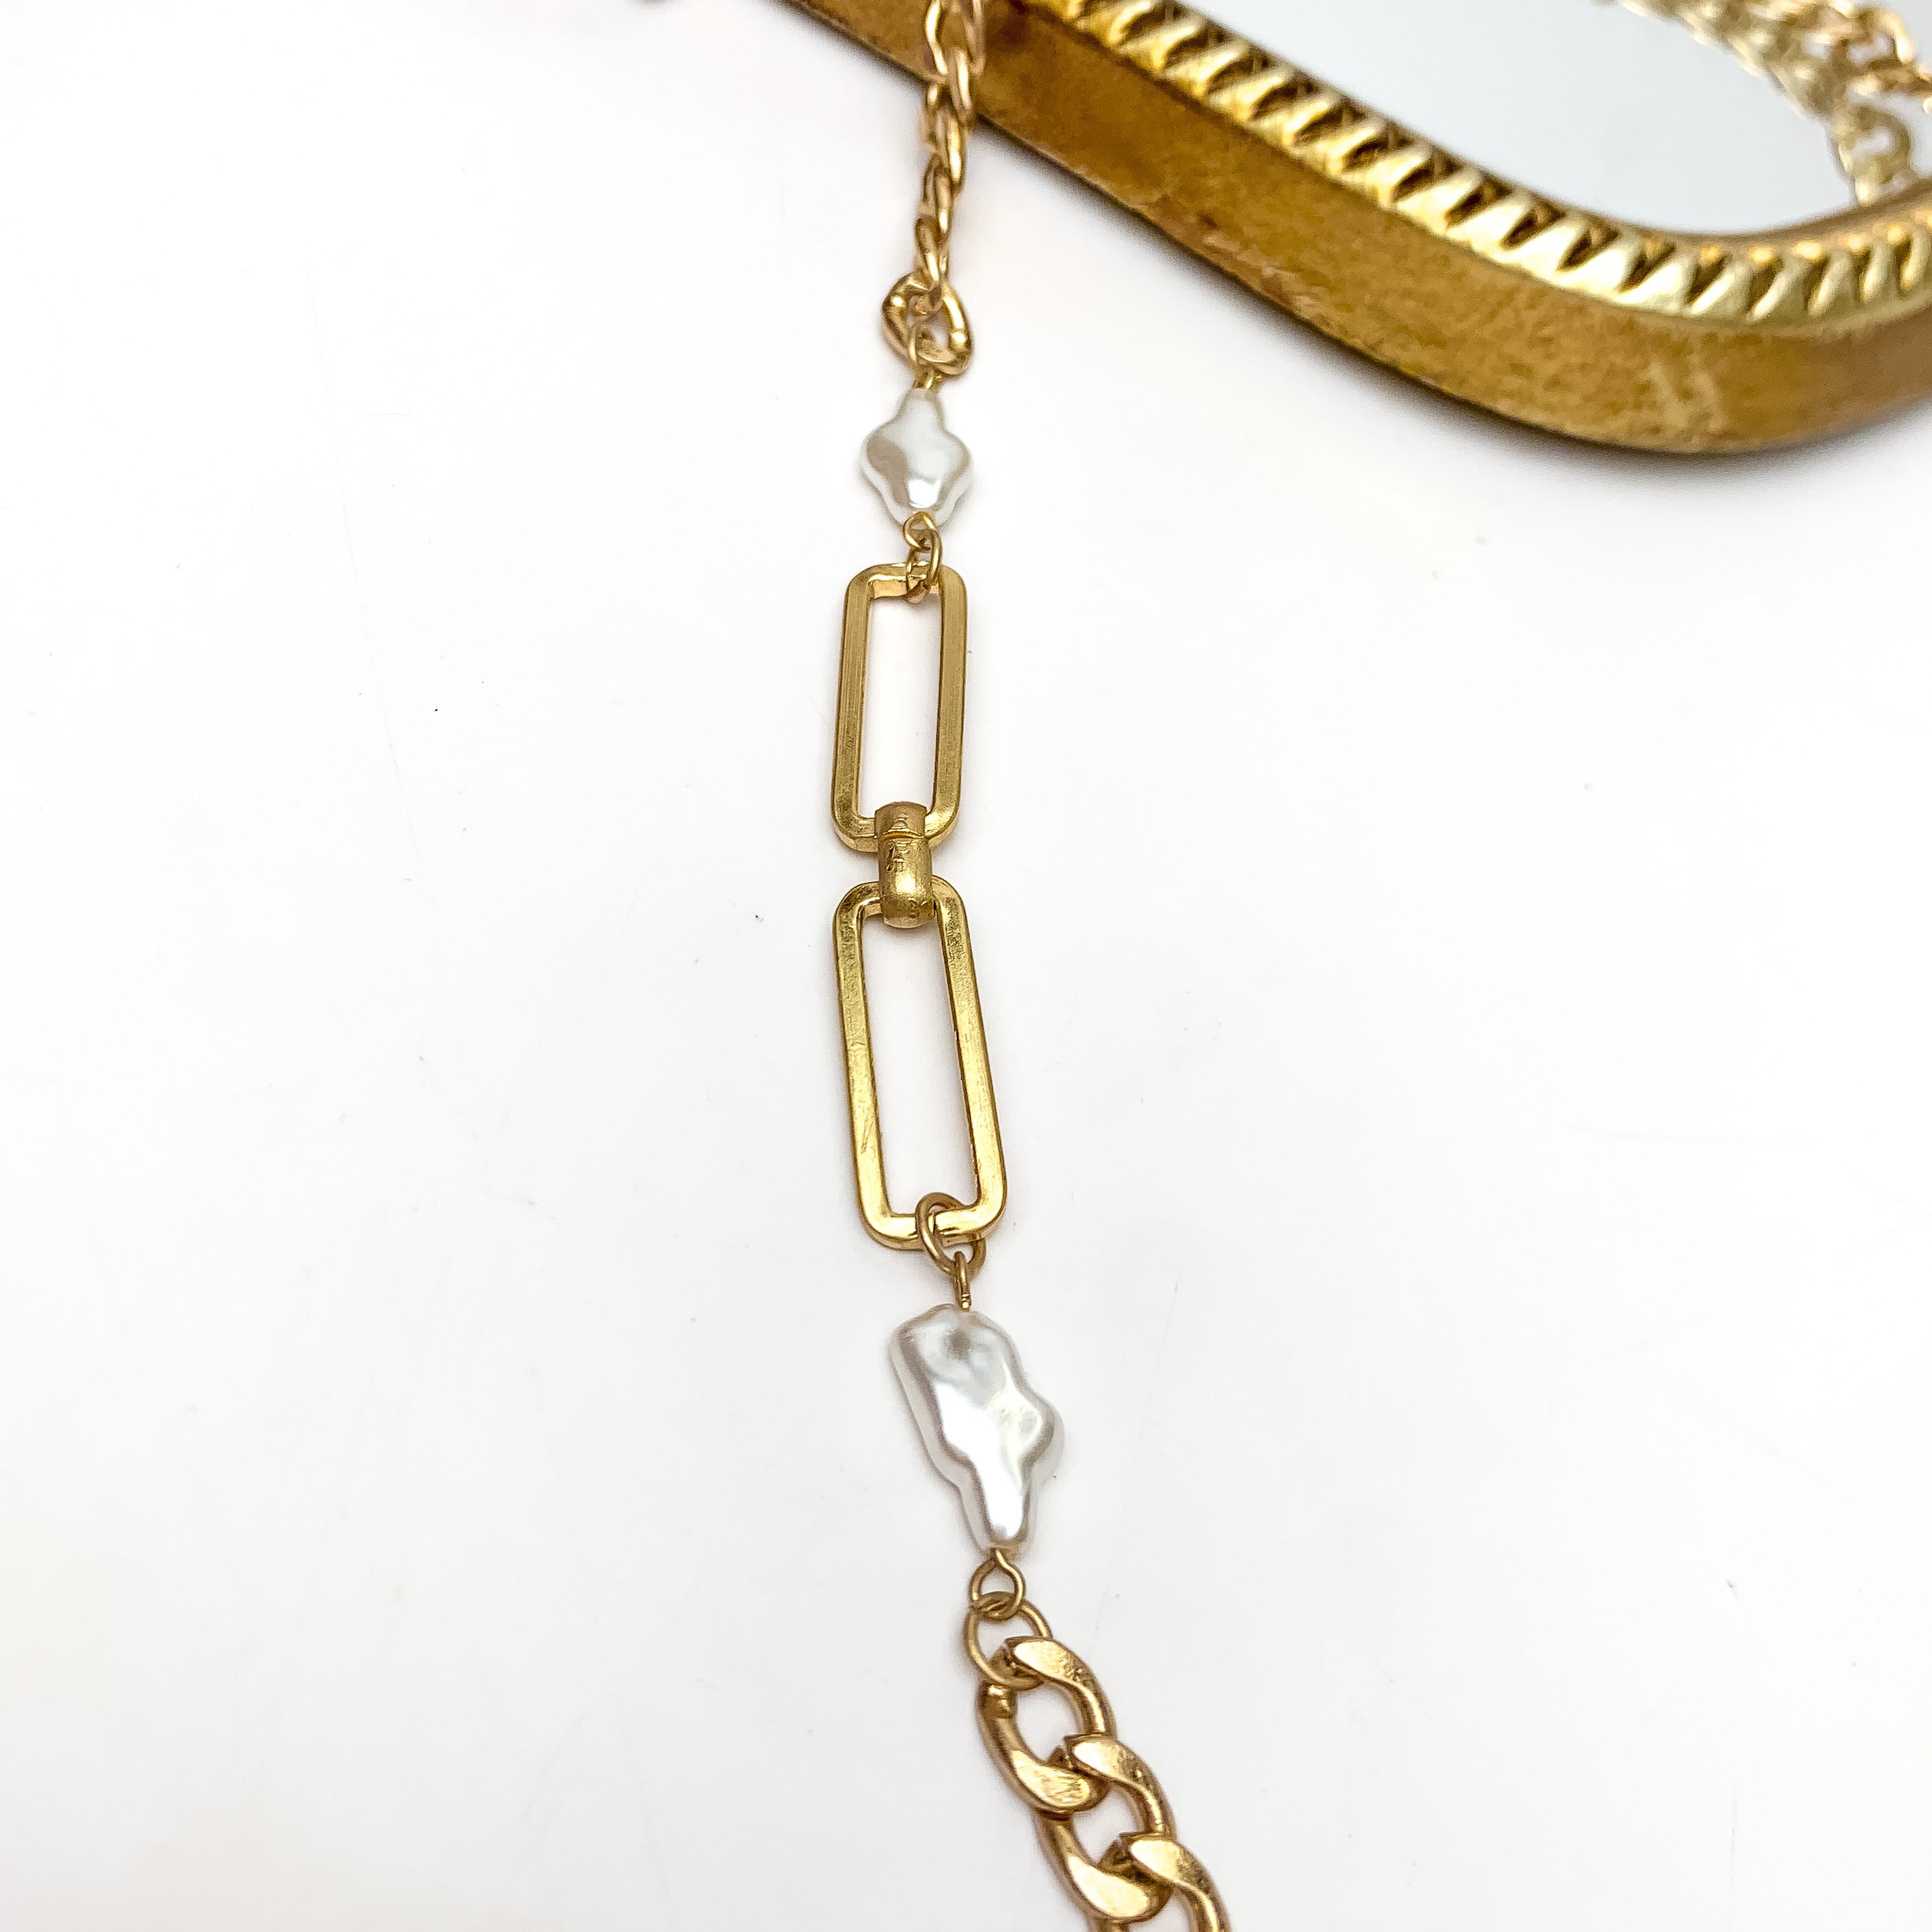 She's Pretty in Pearl Gold Tone Chain Necklace With Pearl Accents - Giddy Up Glamour Boutique